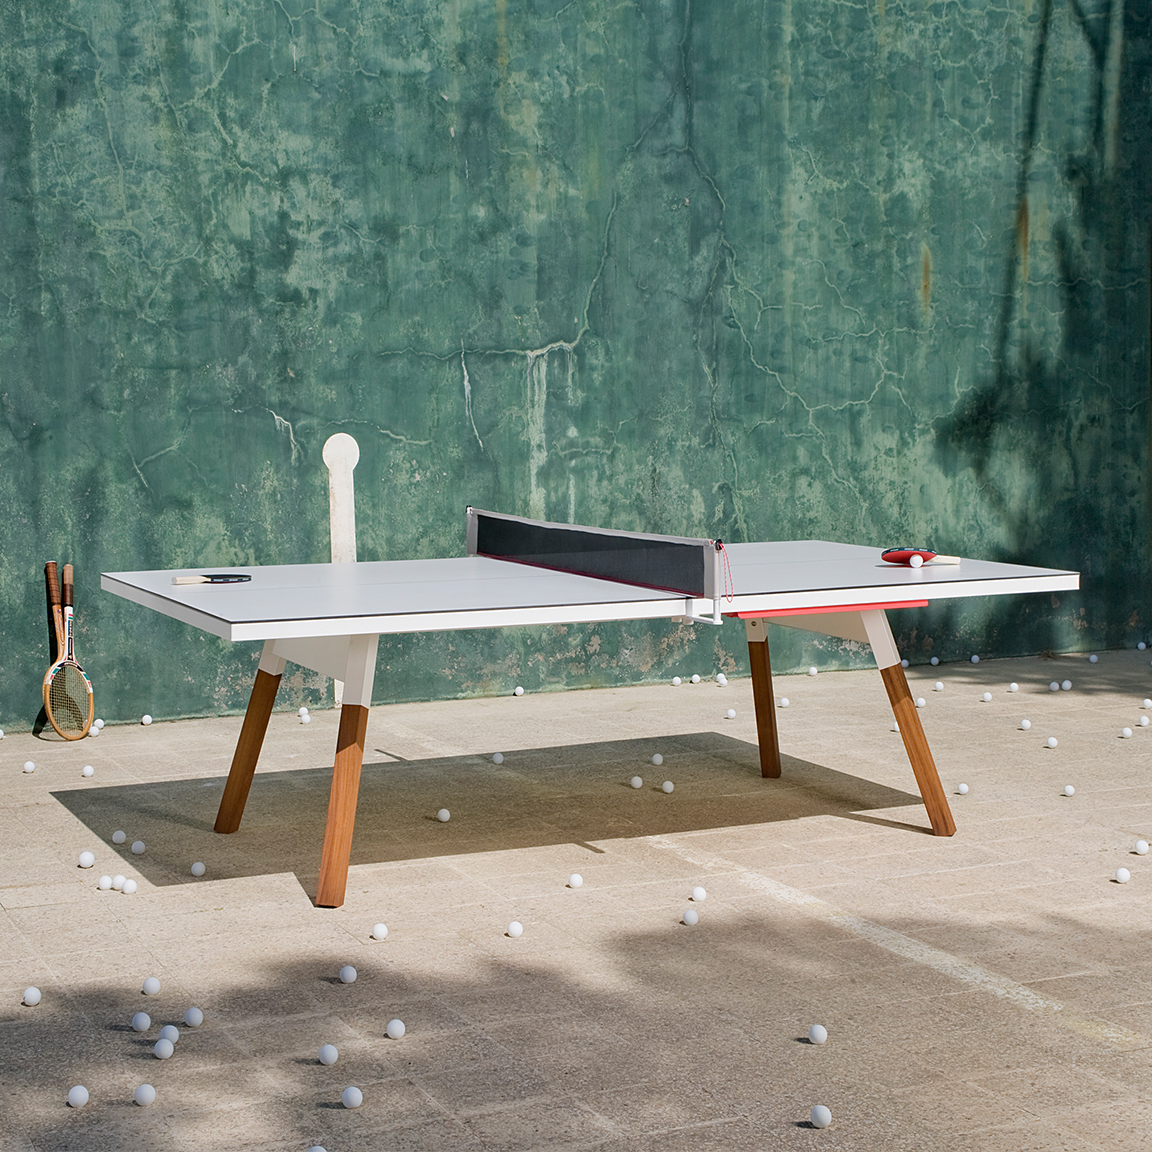 RS Barcelona You and Me Standard Indoor/Outdoor Ping Pong Table